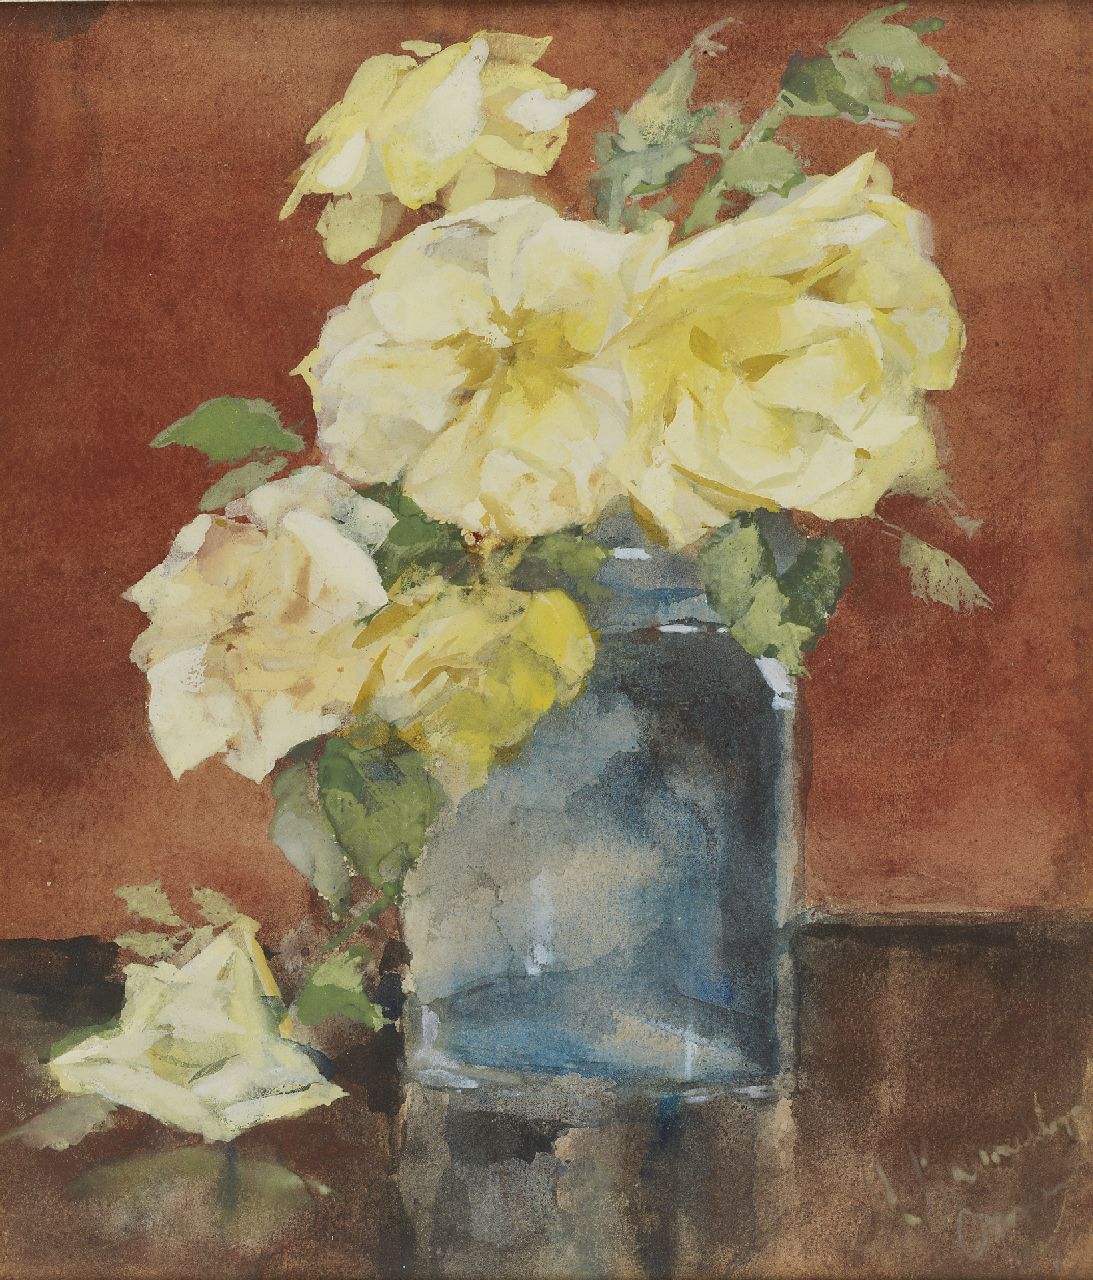 Kamerlingh Onnes M.  | Menso Kamerlingh Onnes, Glass vase with roses, pencil and watercolour on paper 25.3 x 21.1 cm, signed l.r. and painted circa 1885